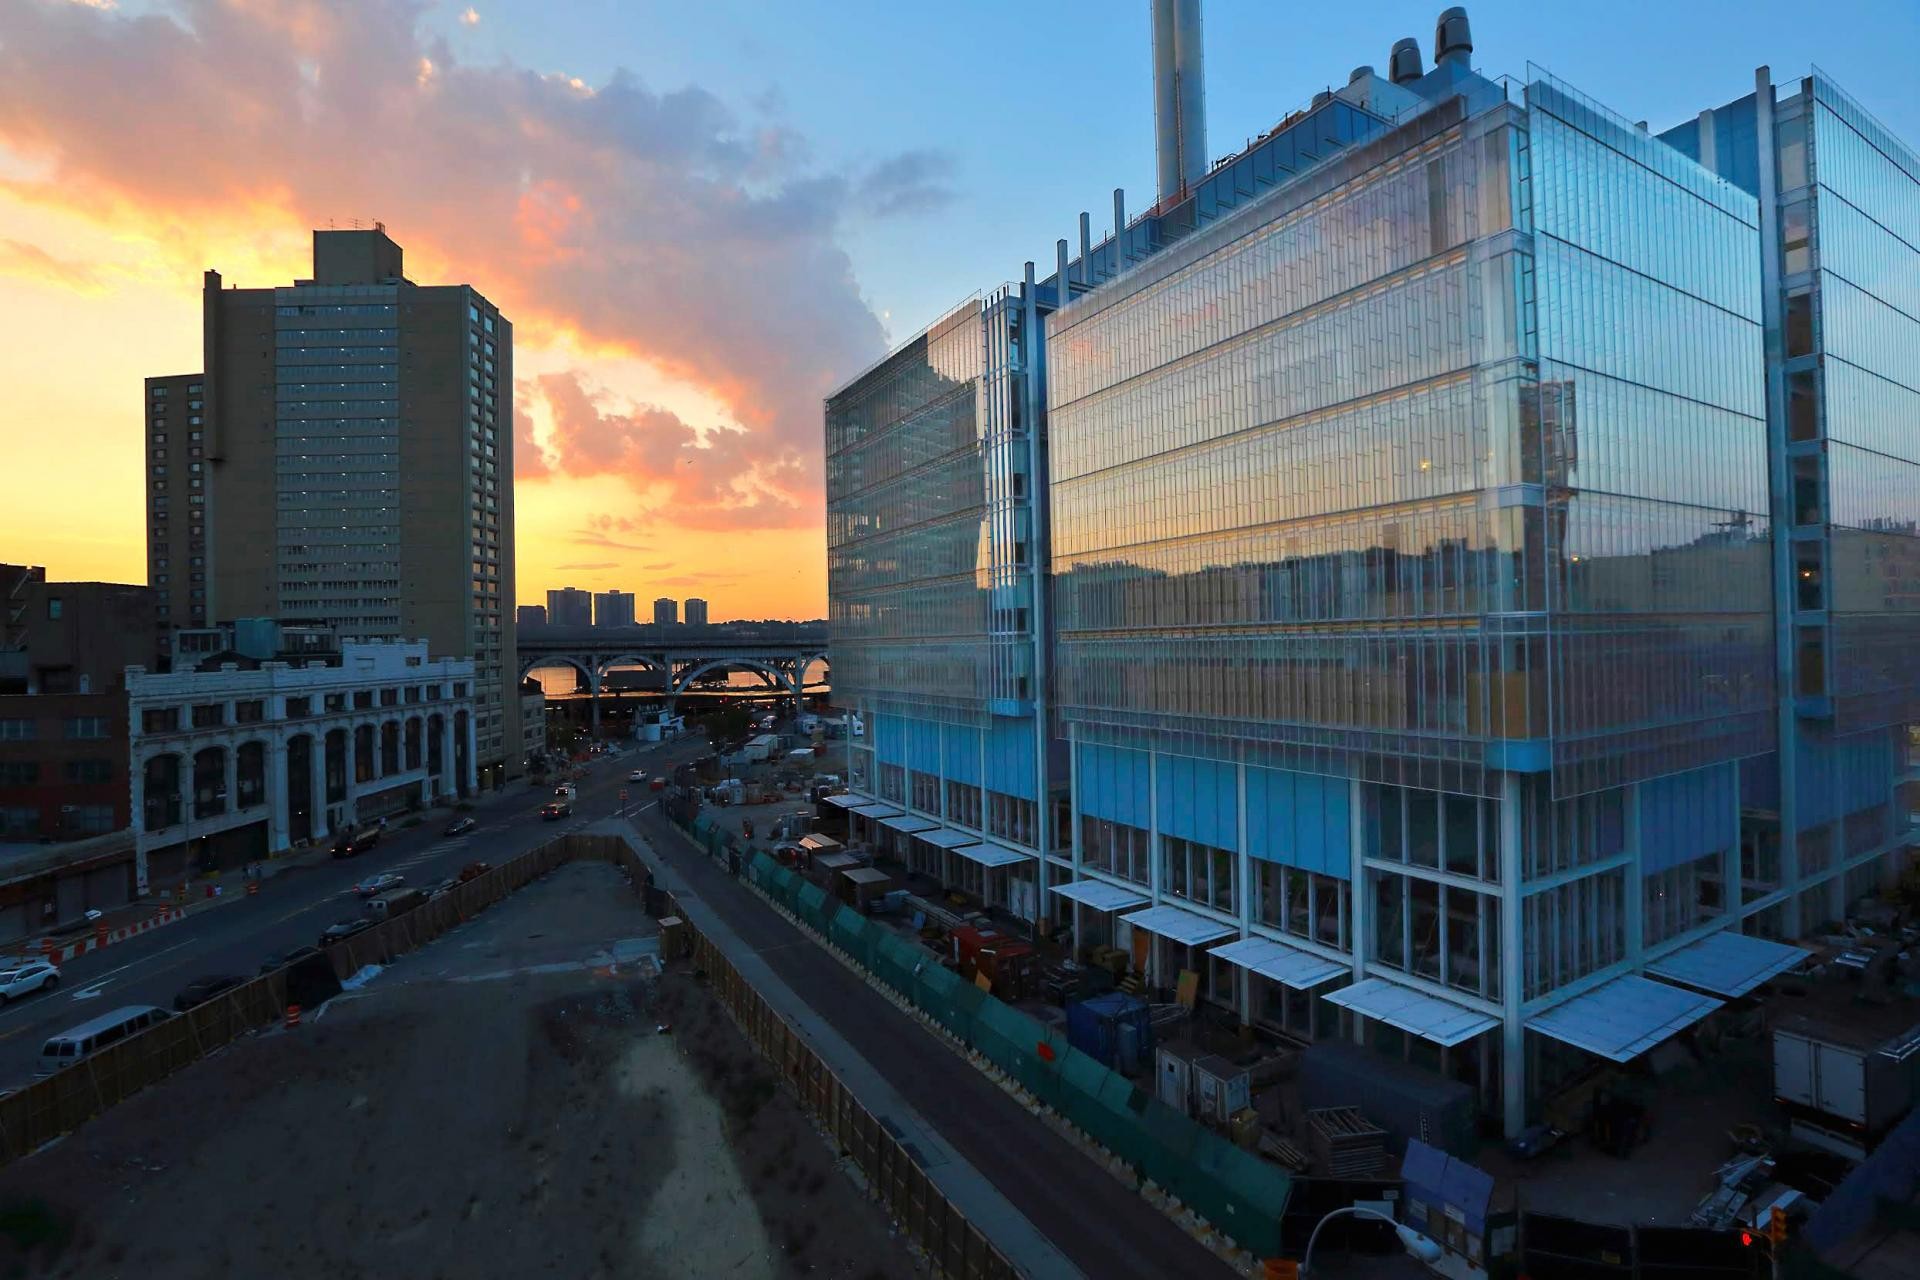 View of Jerome L. Greene Science Center, a glass and steel structure, against a sunset.